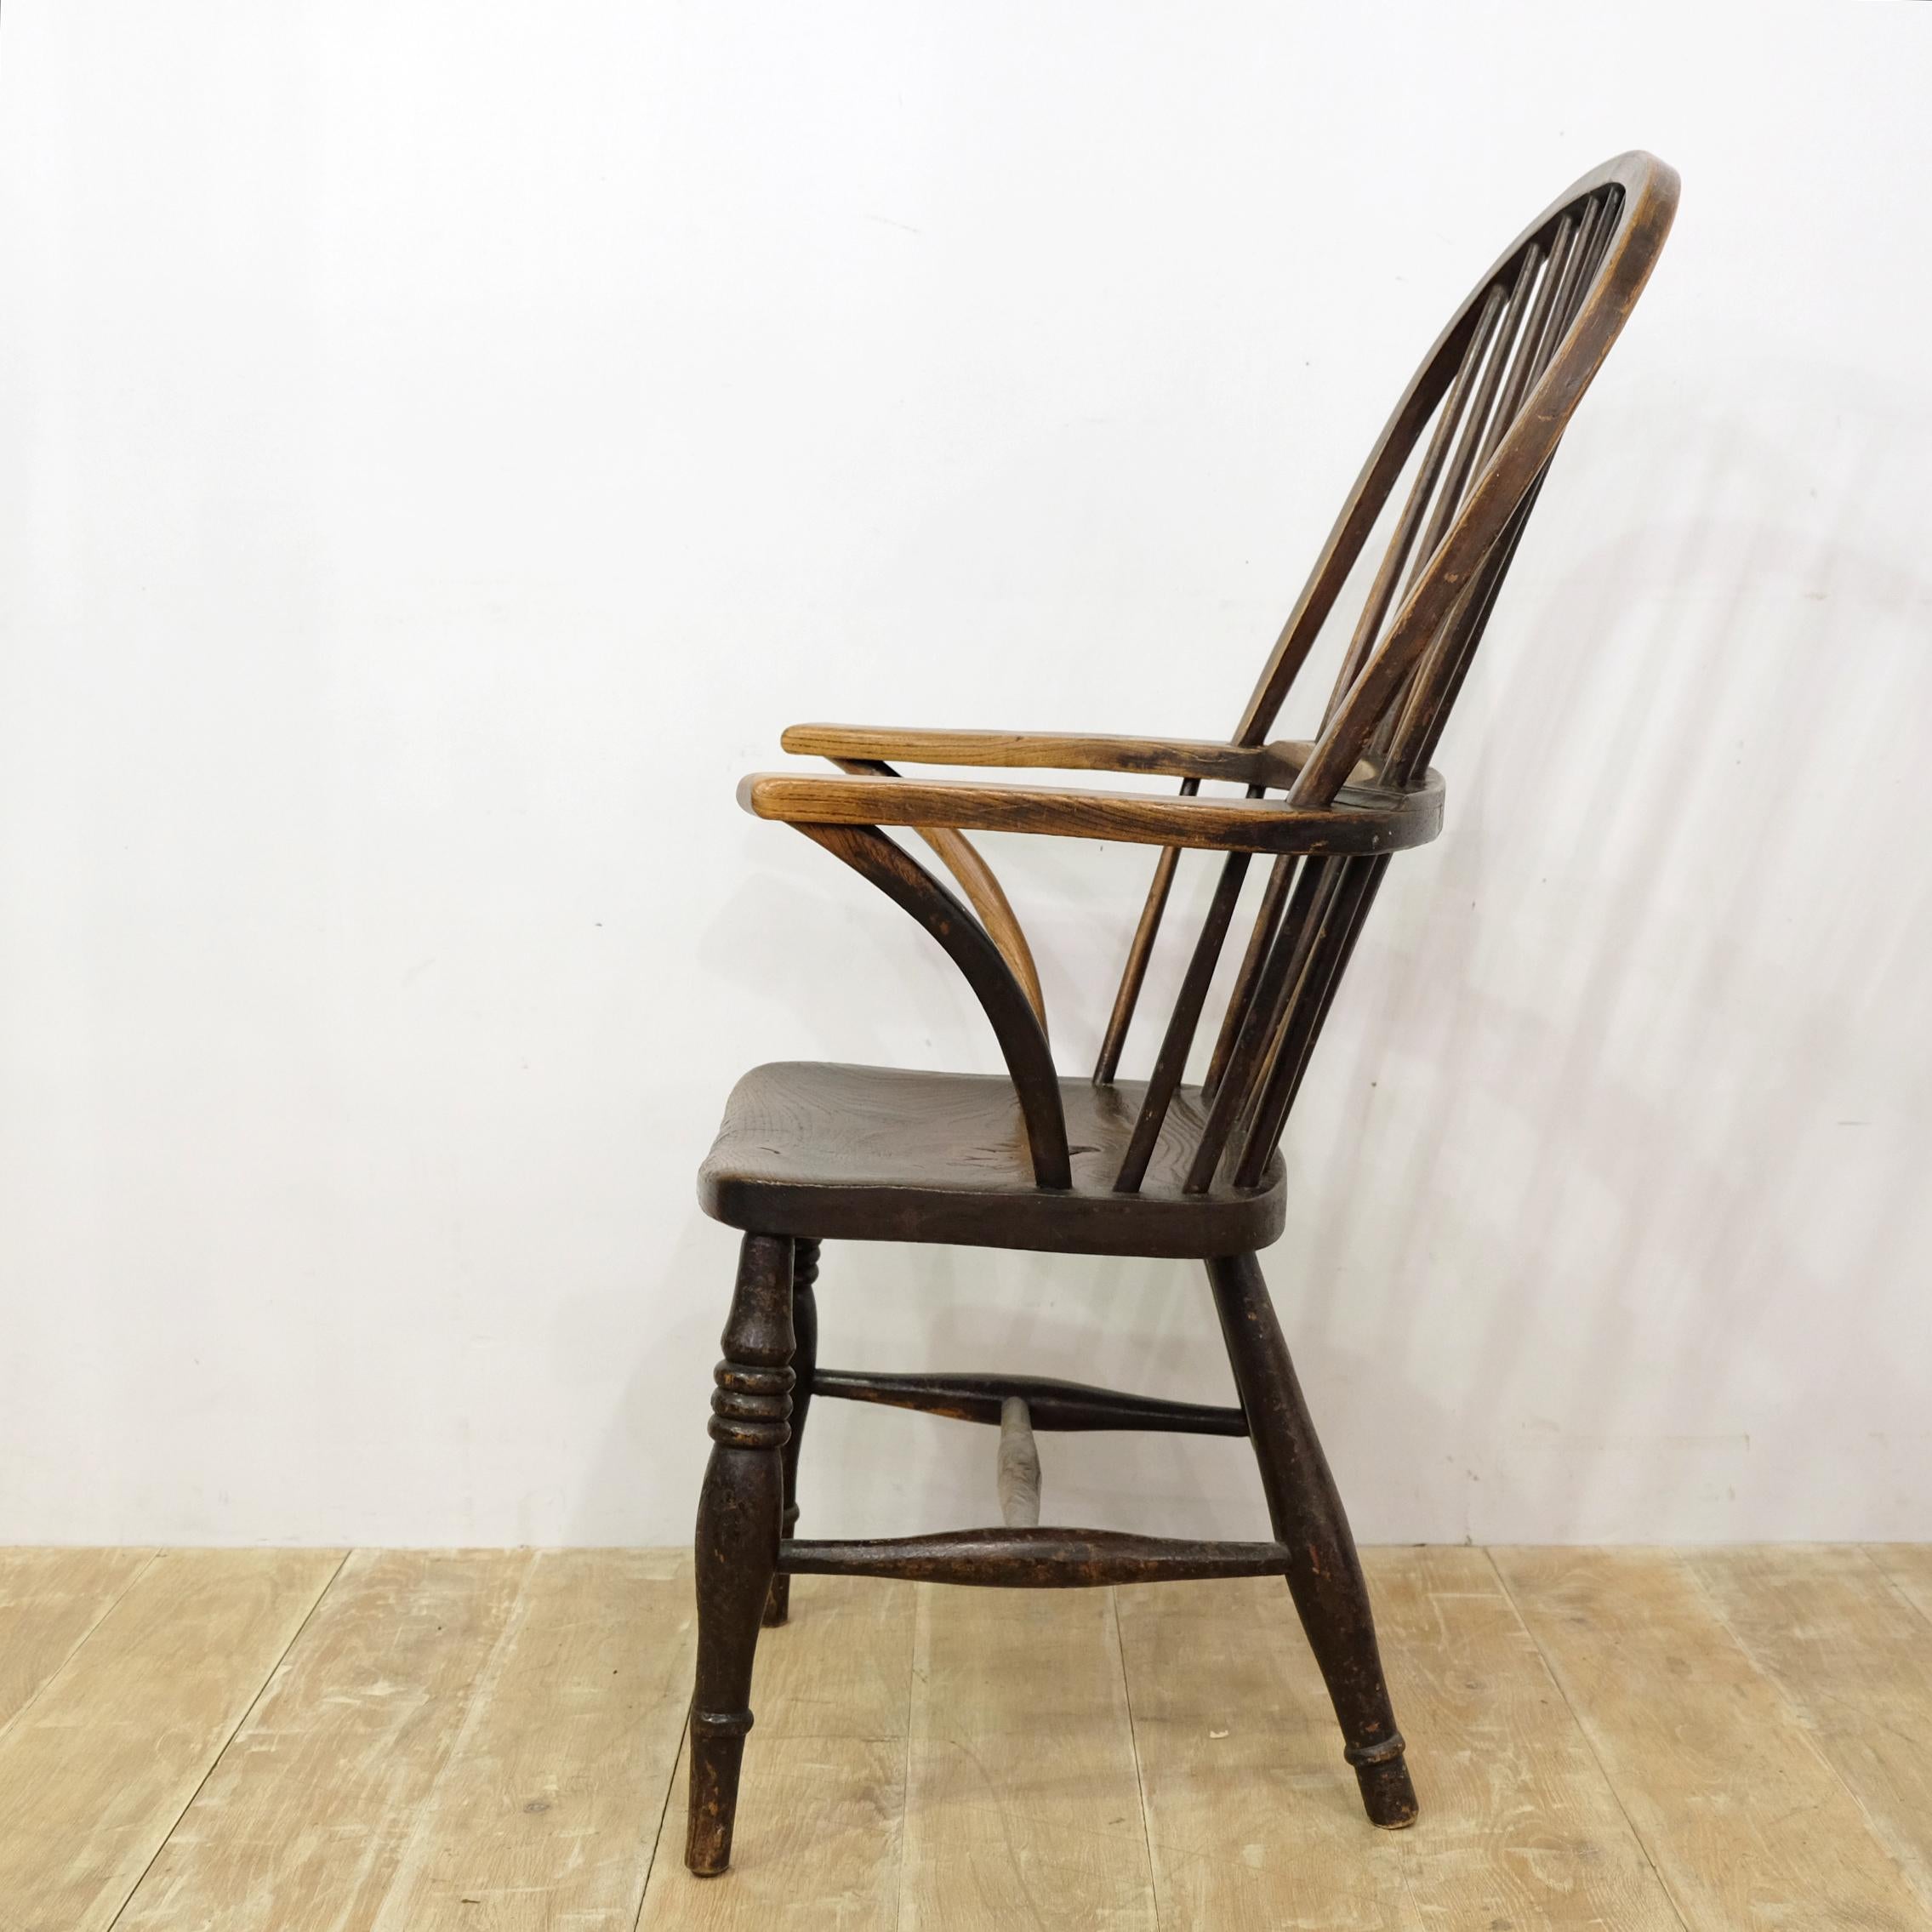 West Country Windsor Armchair, English, Devonshire, Elm and Ash, 1830s Chair 1